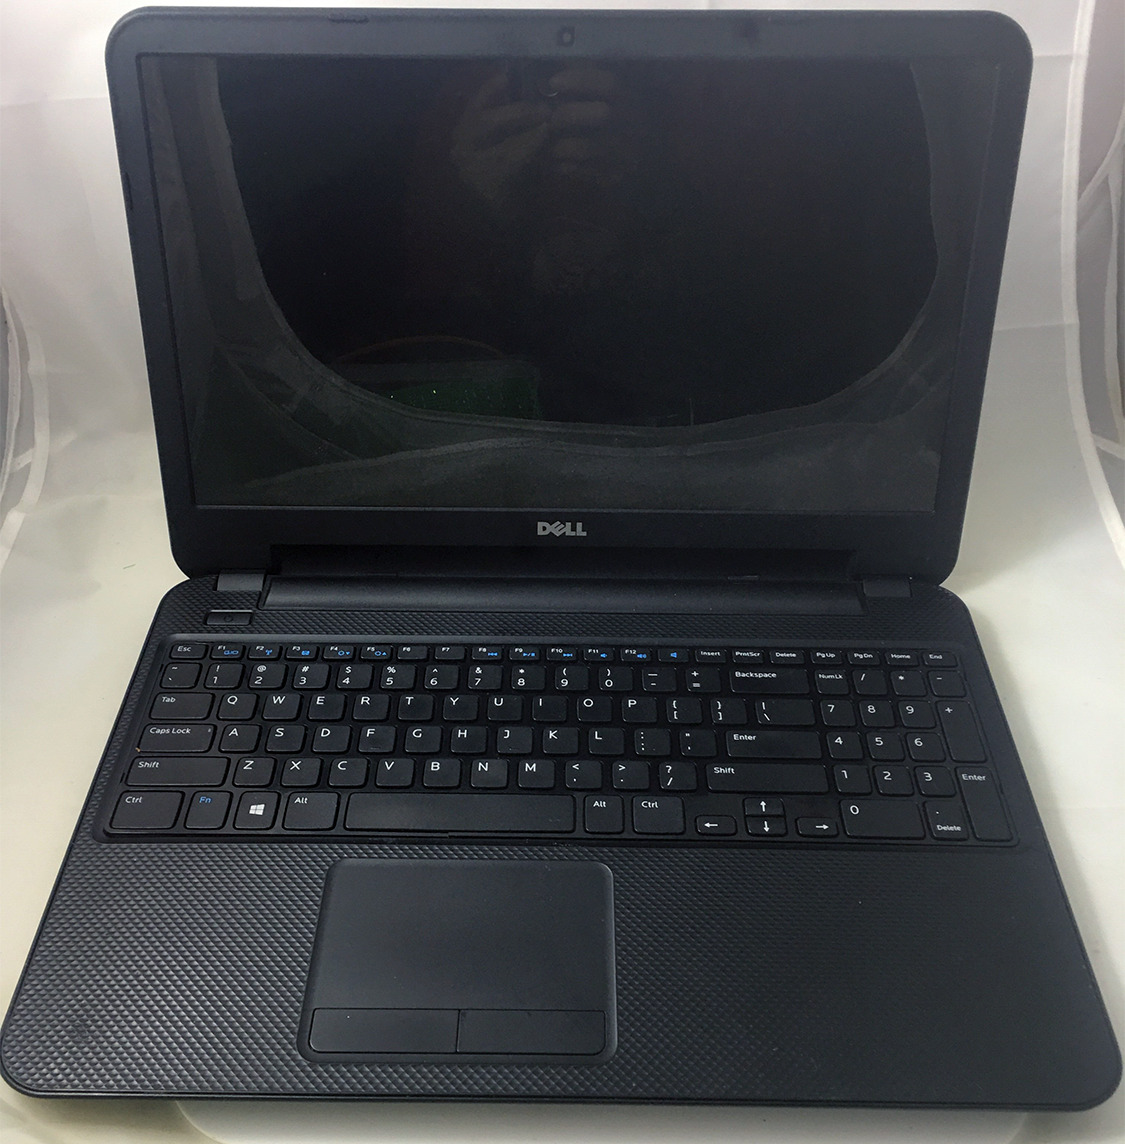 FOR PARTS Dell Inspiron Laptop PJ8GD A00 500GB Drive 4GB Ram Windows 10